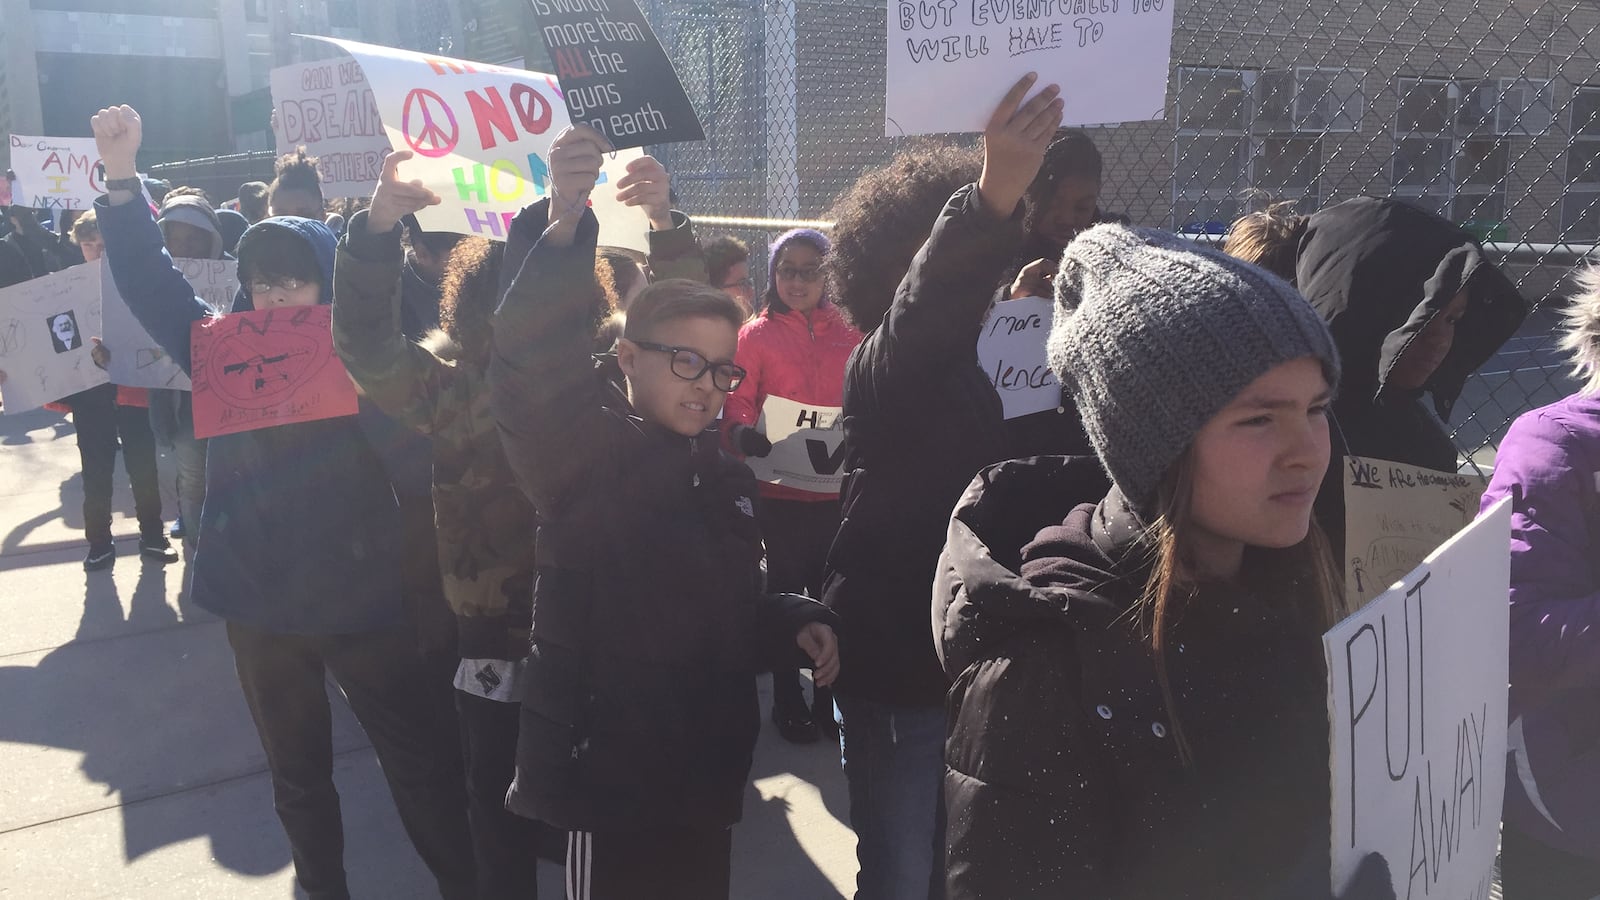 Students at P.S. 261 in Brooklyn walked out of class in March to honor the victims of the Parkland, Fla. shooting and call for stricter gun control laws.